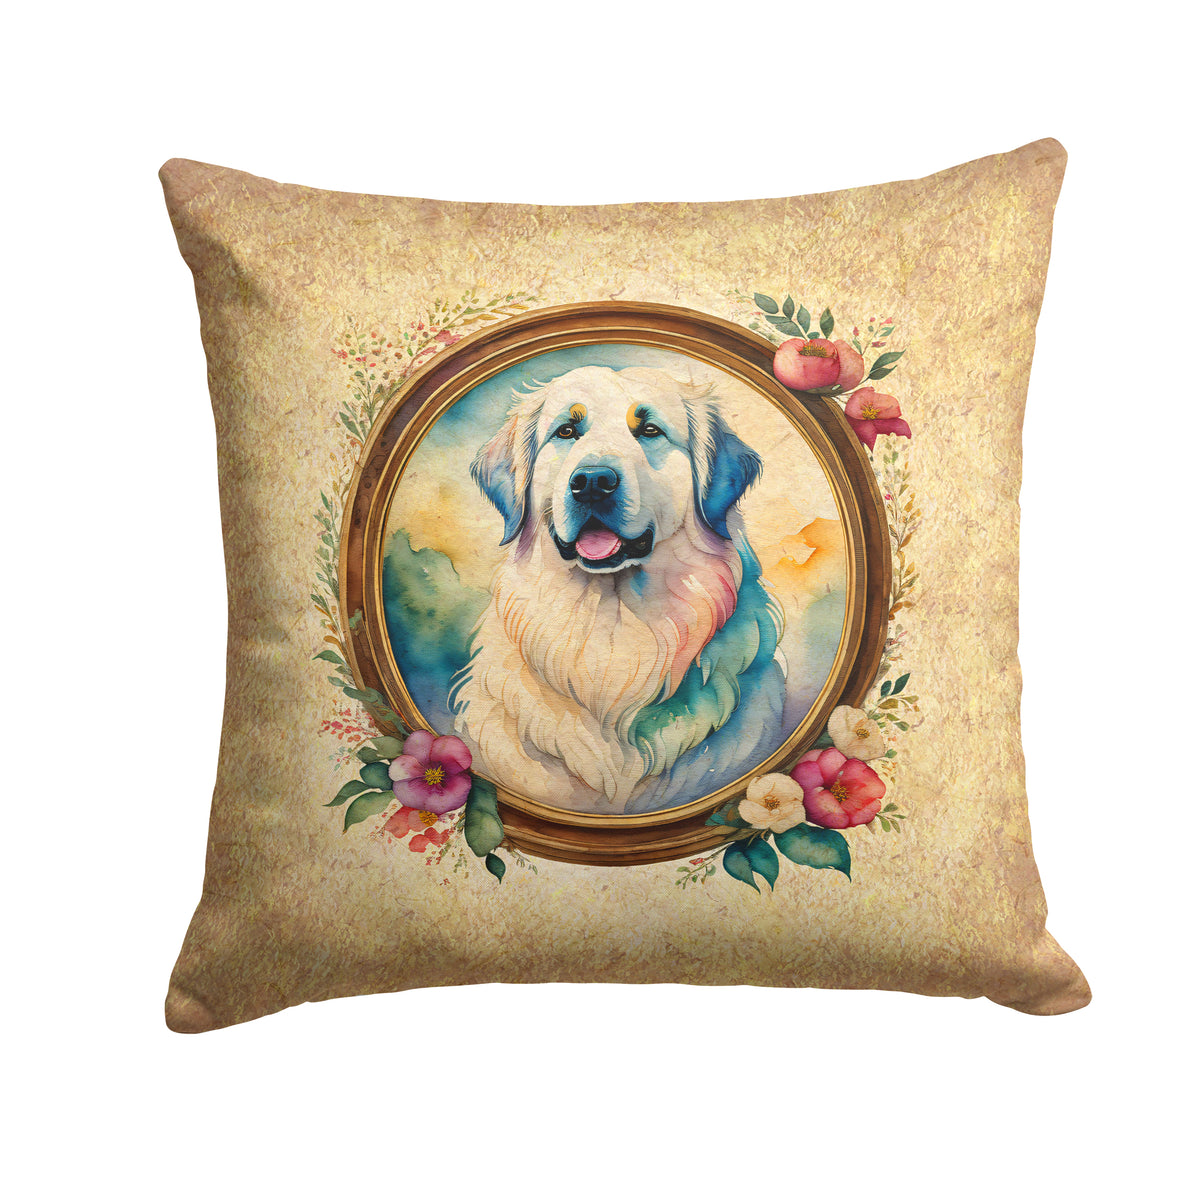 Buy this Great Pyrenees and Flowers Fabric Decorative Pillow